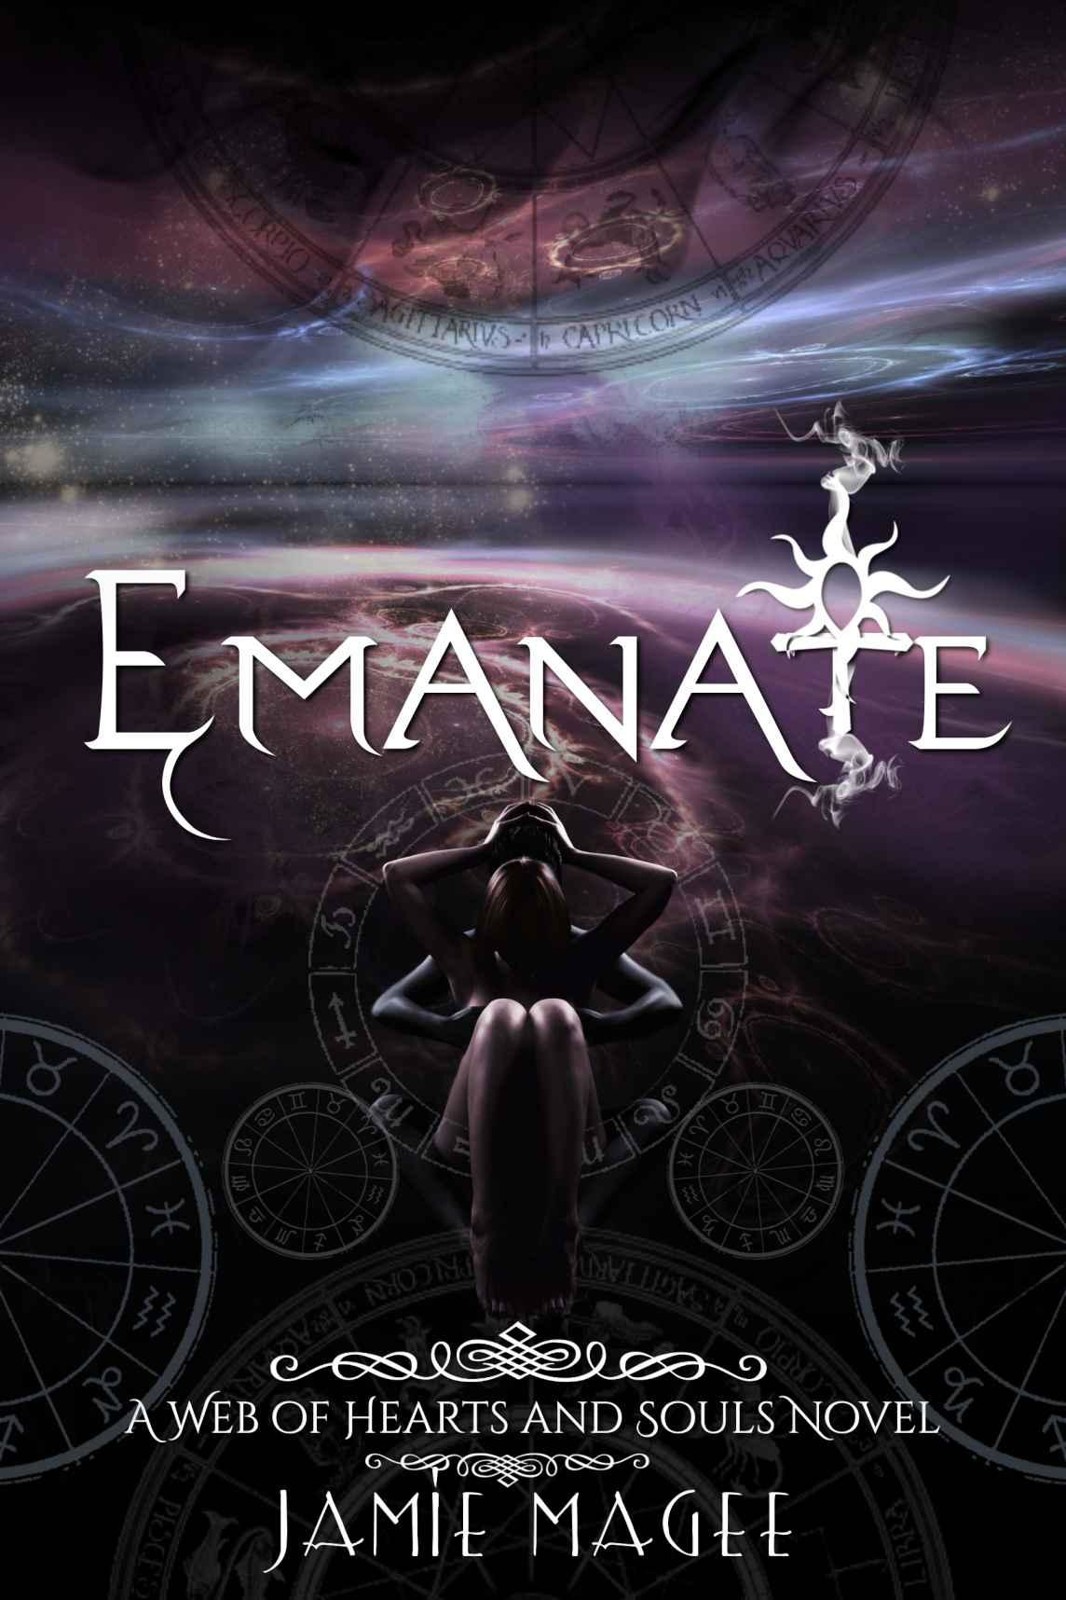 Emanate: Insight Series ((Insight) Web of Hearts and Souls) by Jamie Magee